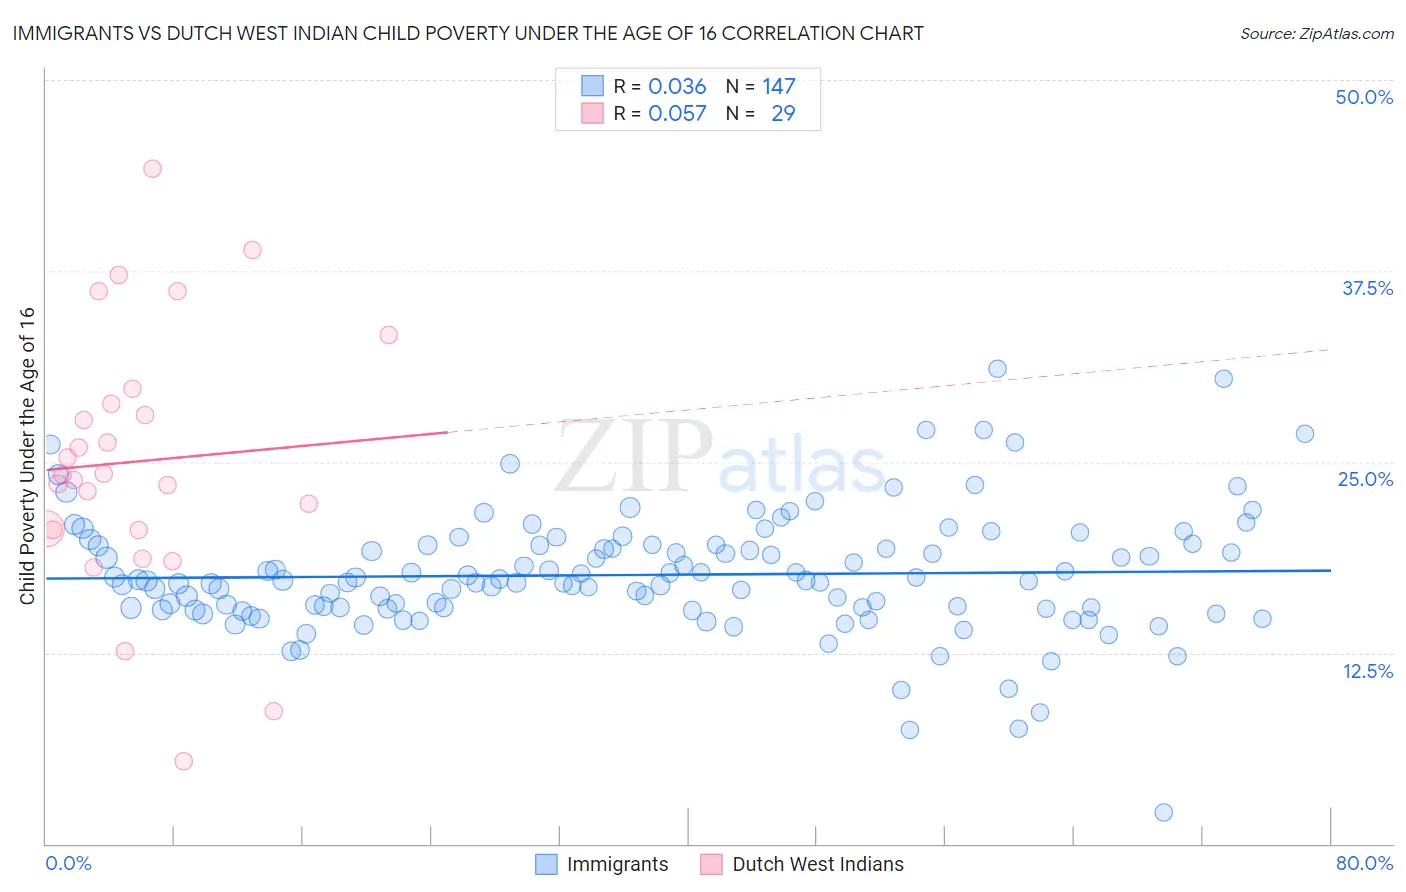 Immigrants vs Dutch West Indian Child Poverty Under the Age of 16